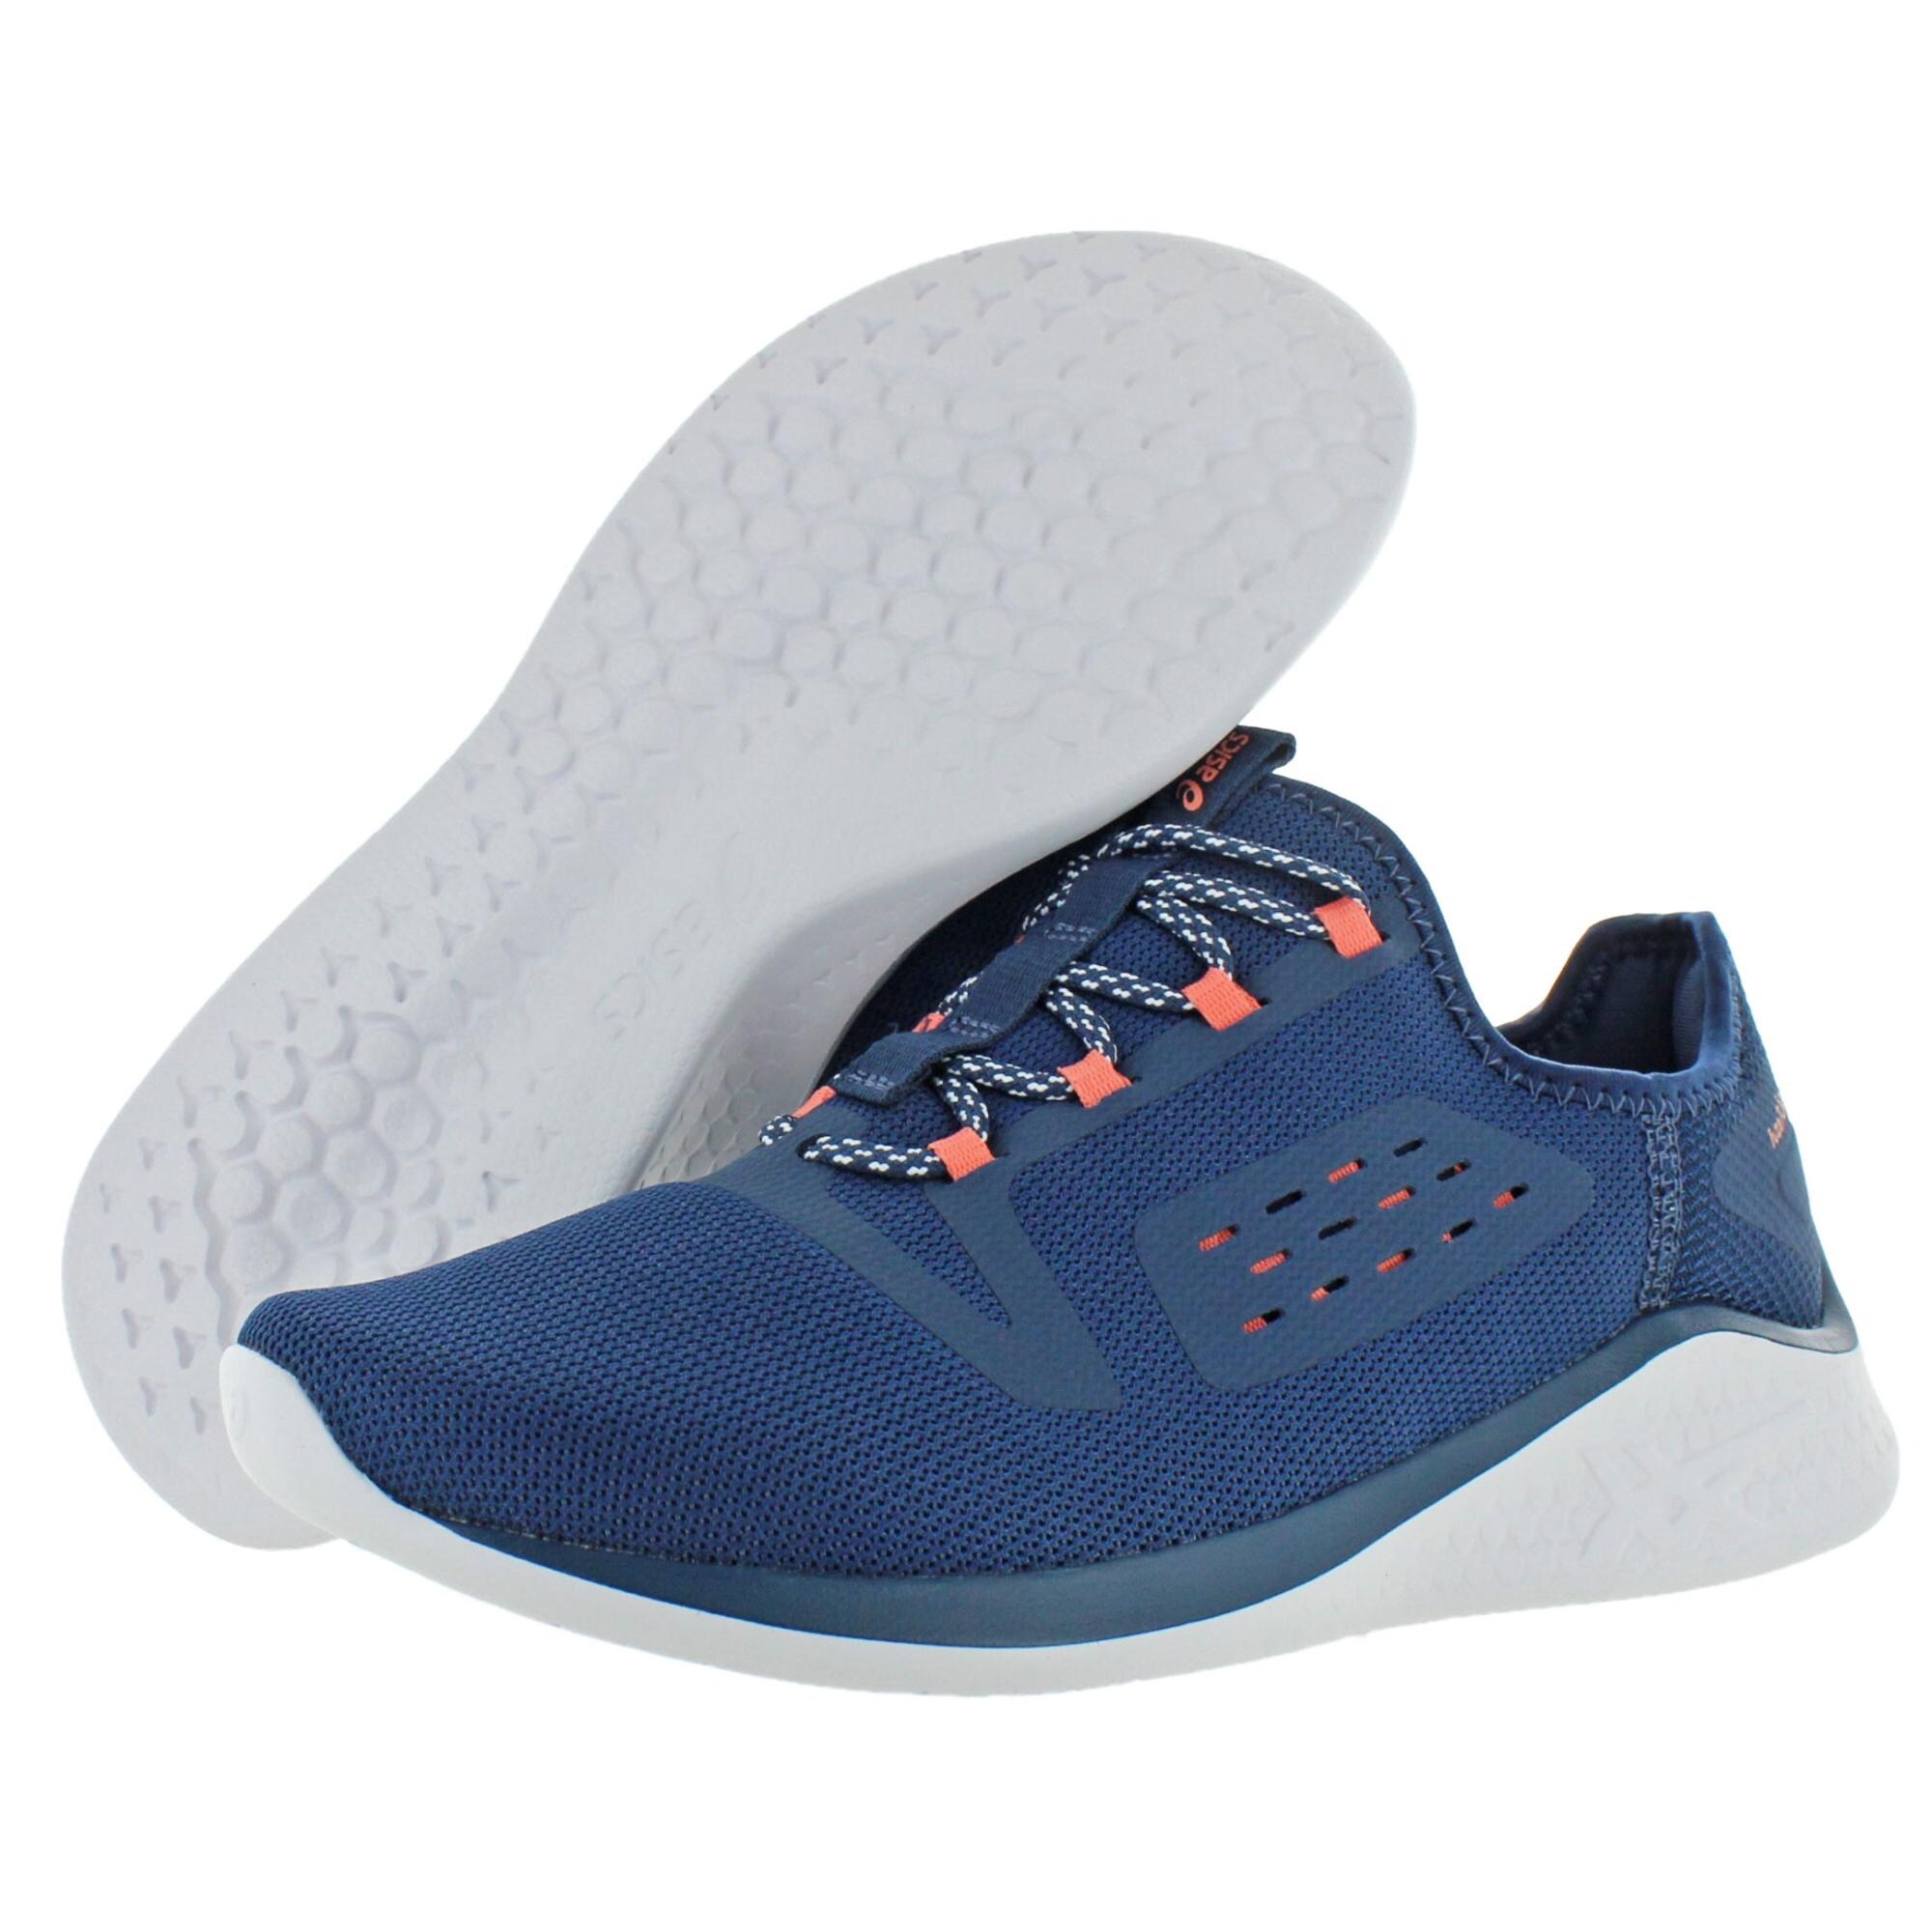 asics women's workplace shoes